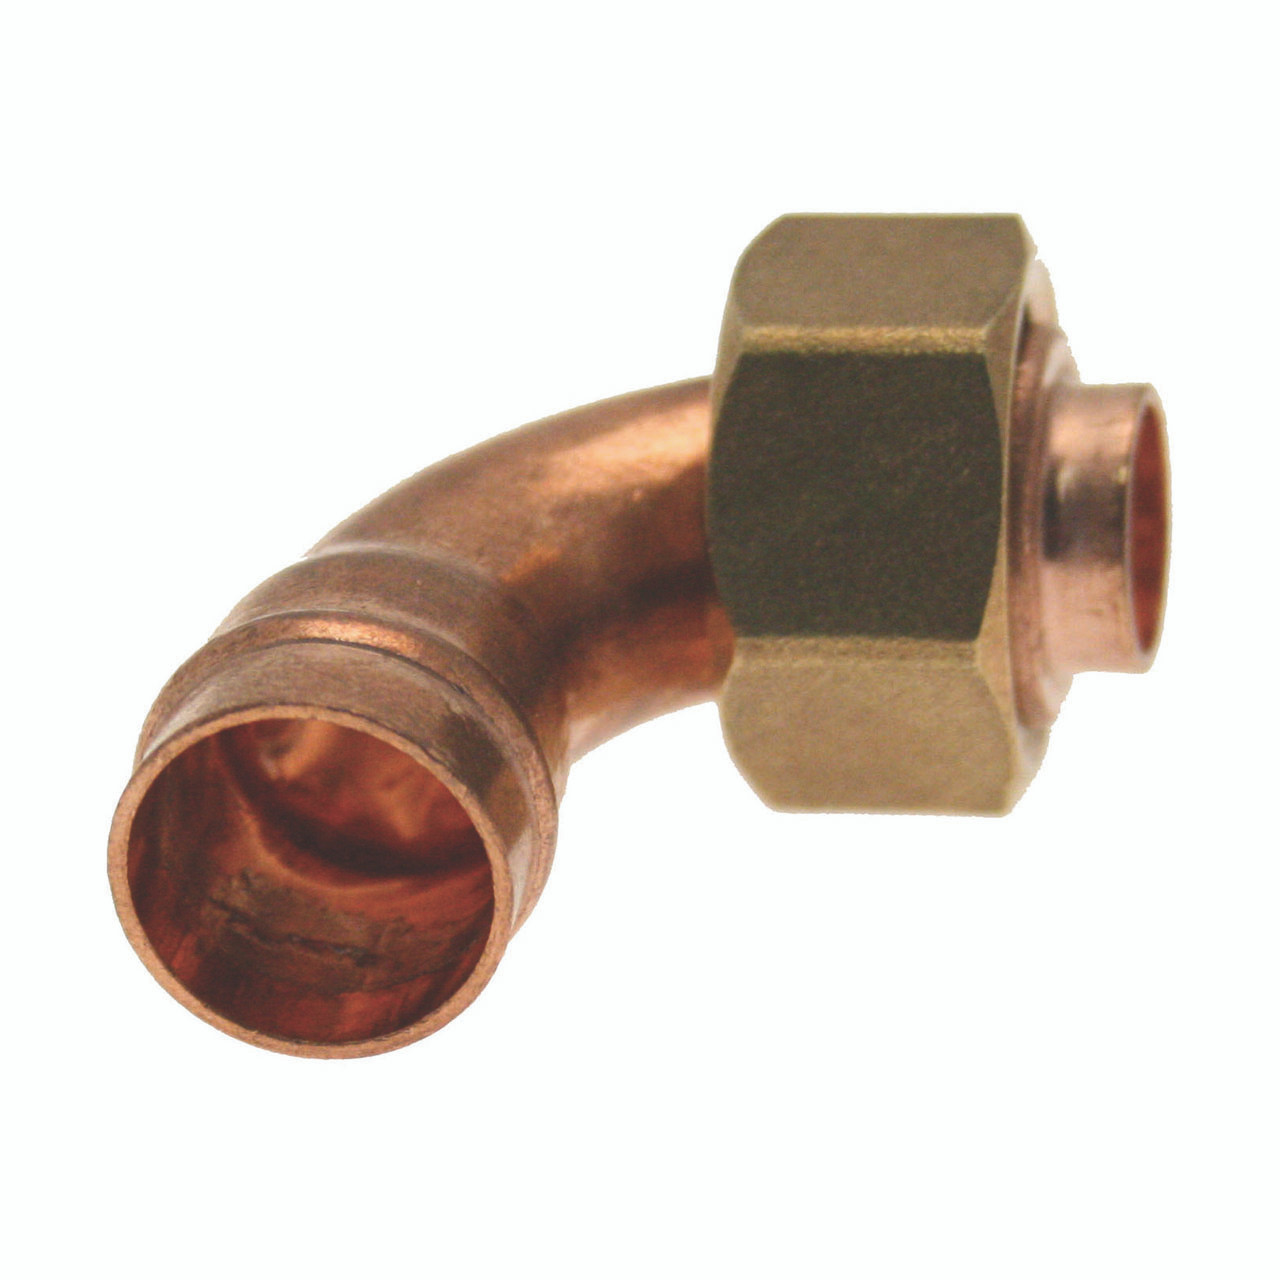 Photograph of Solder Ring Fitting Bent Tap Connector 15mm x ?"